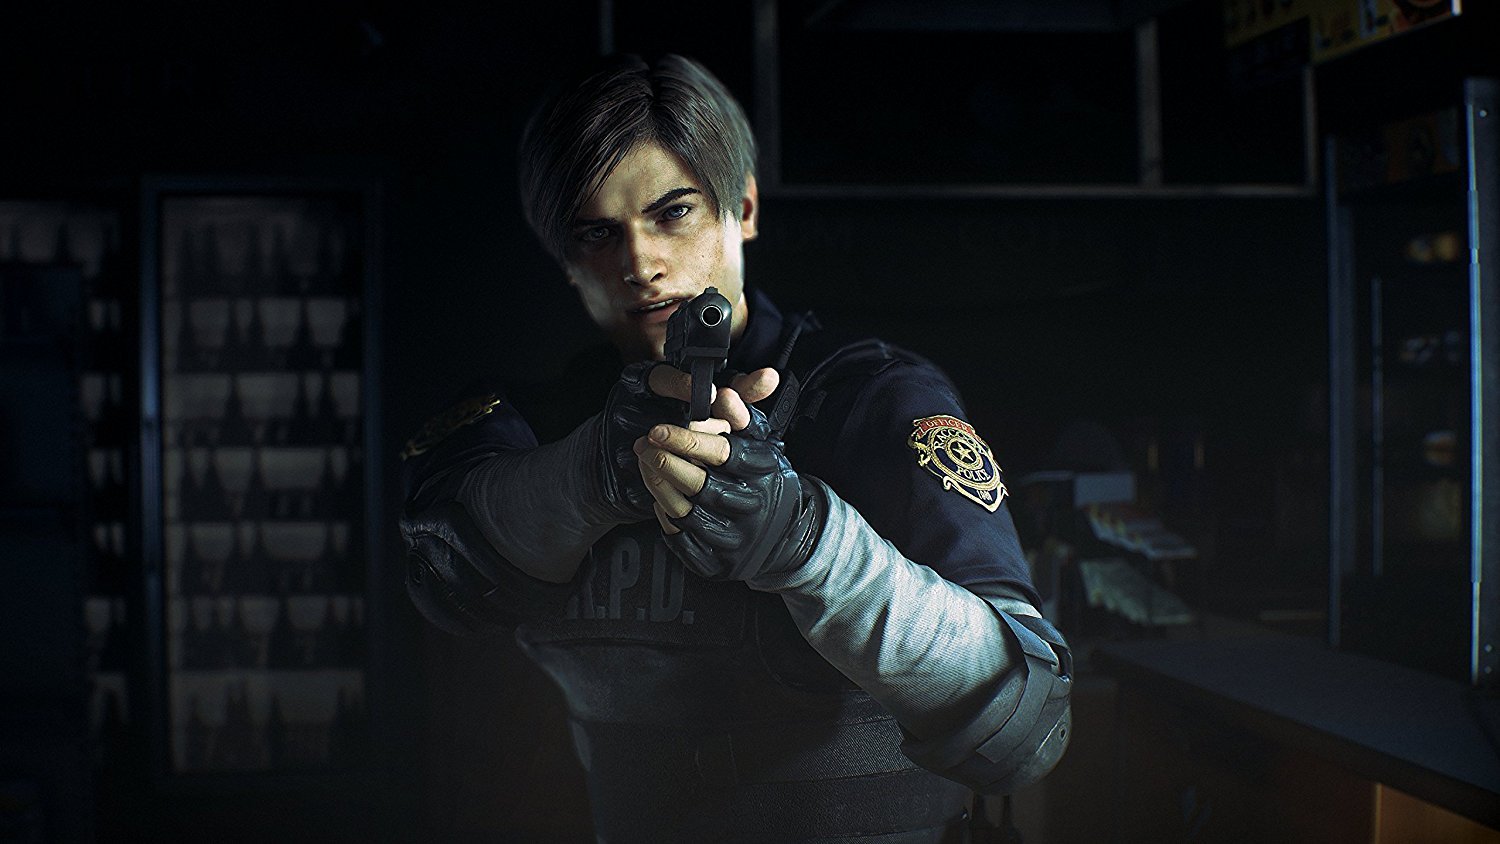 Resident Evil 2 remake revealed at E3 for PlayStation 4, Xbox One